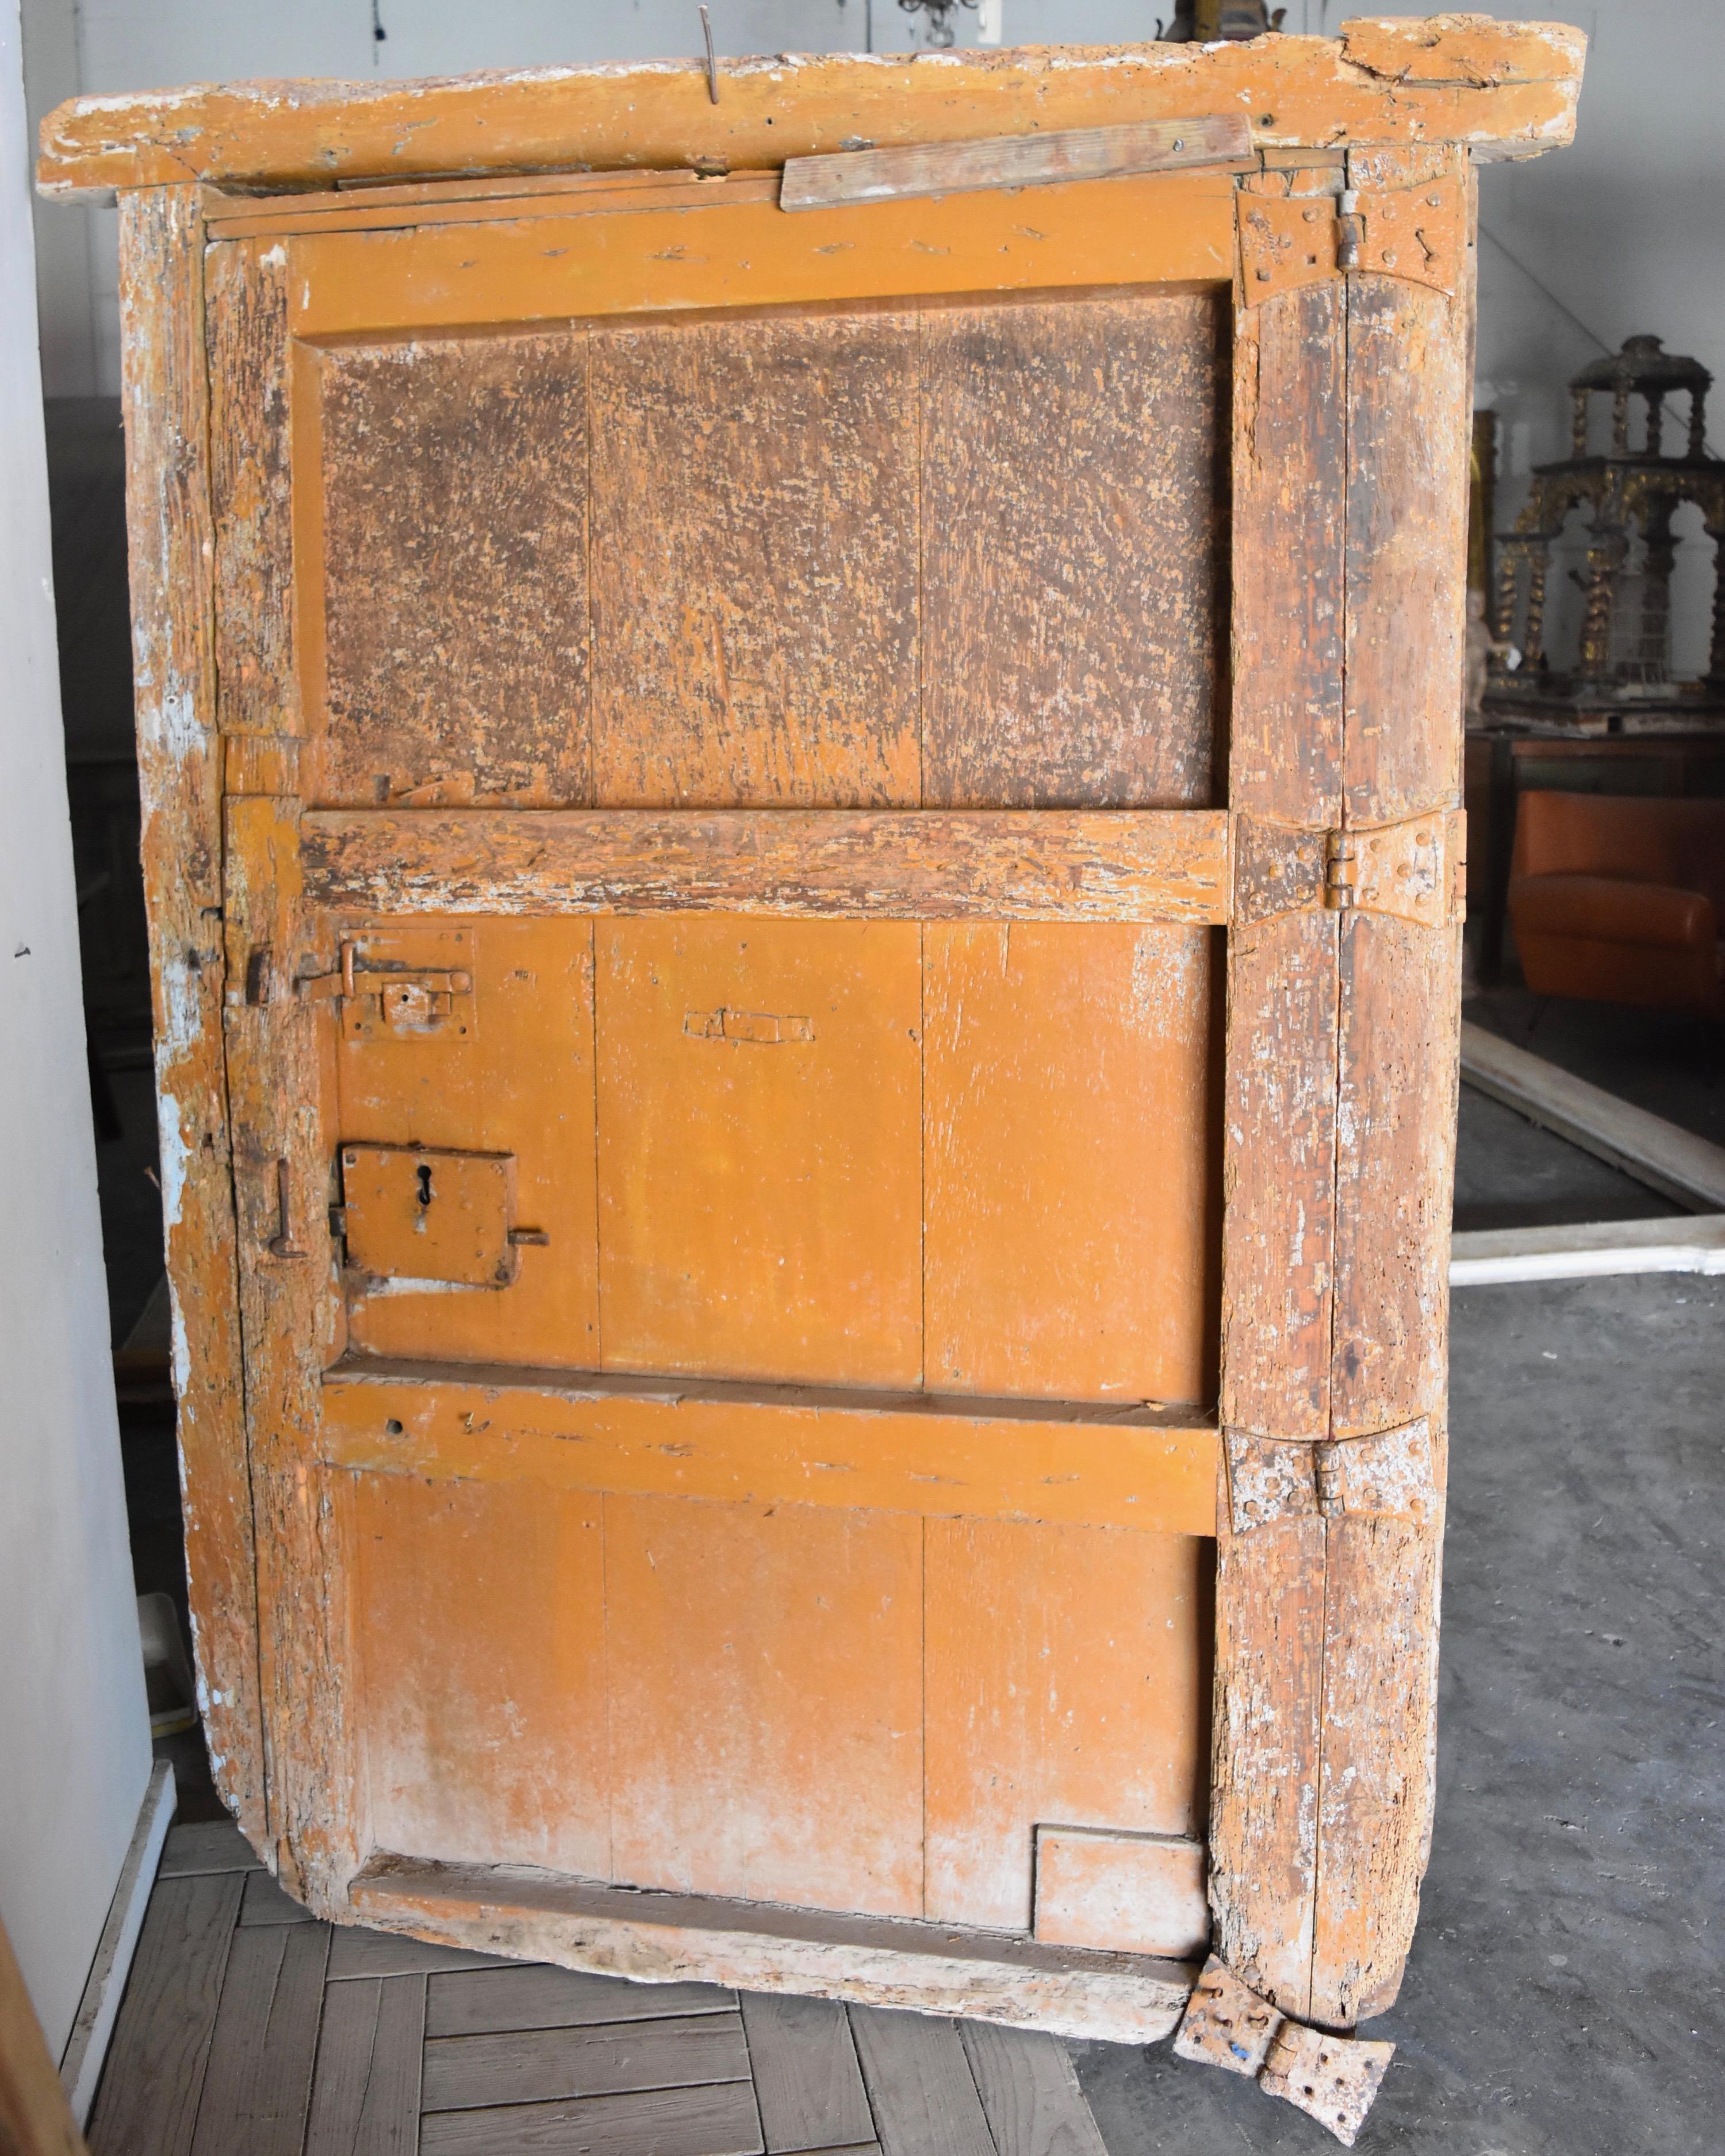 This is a thick heavy duty iron and wooden door from Spain. The paint is original. You can see the wonderful patina in the close up photos. It is distressed around the edges and really handsome in person. Lock and henges are still there as well.